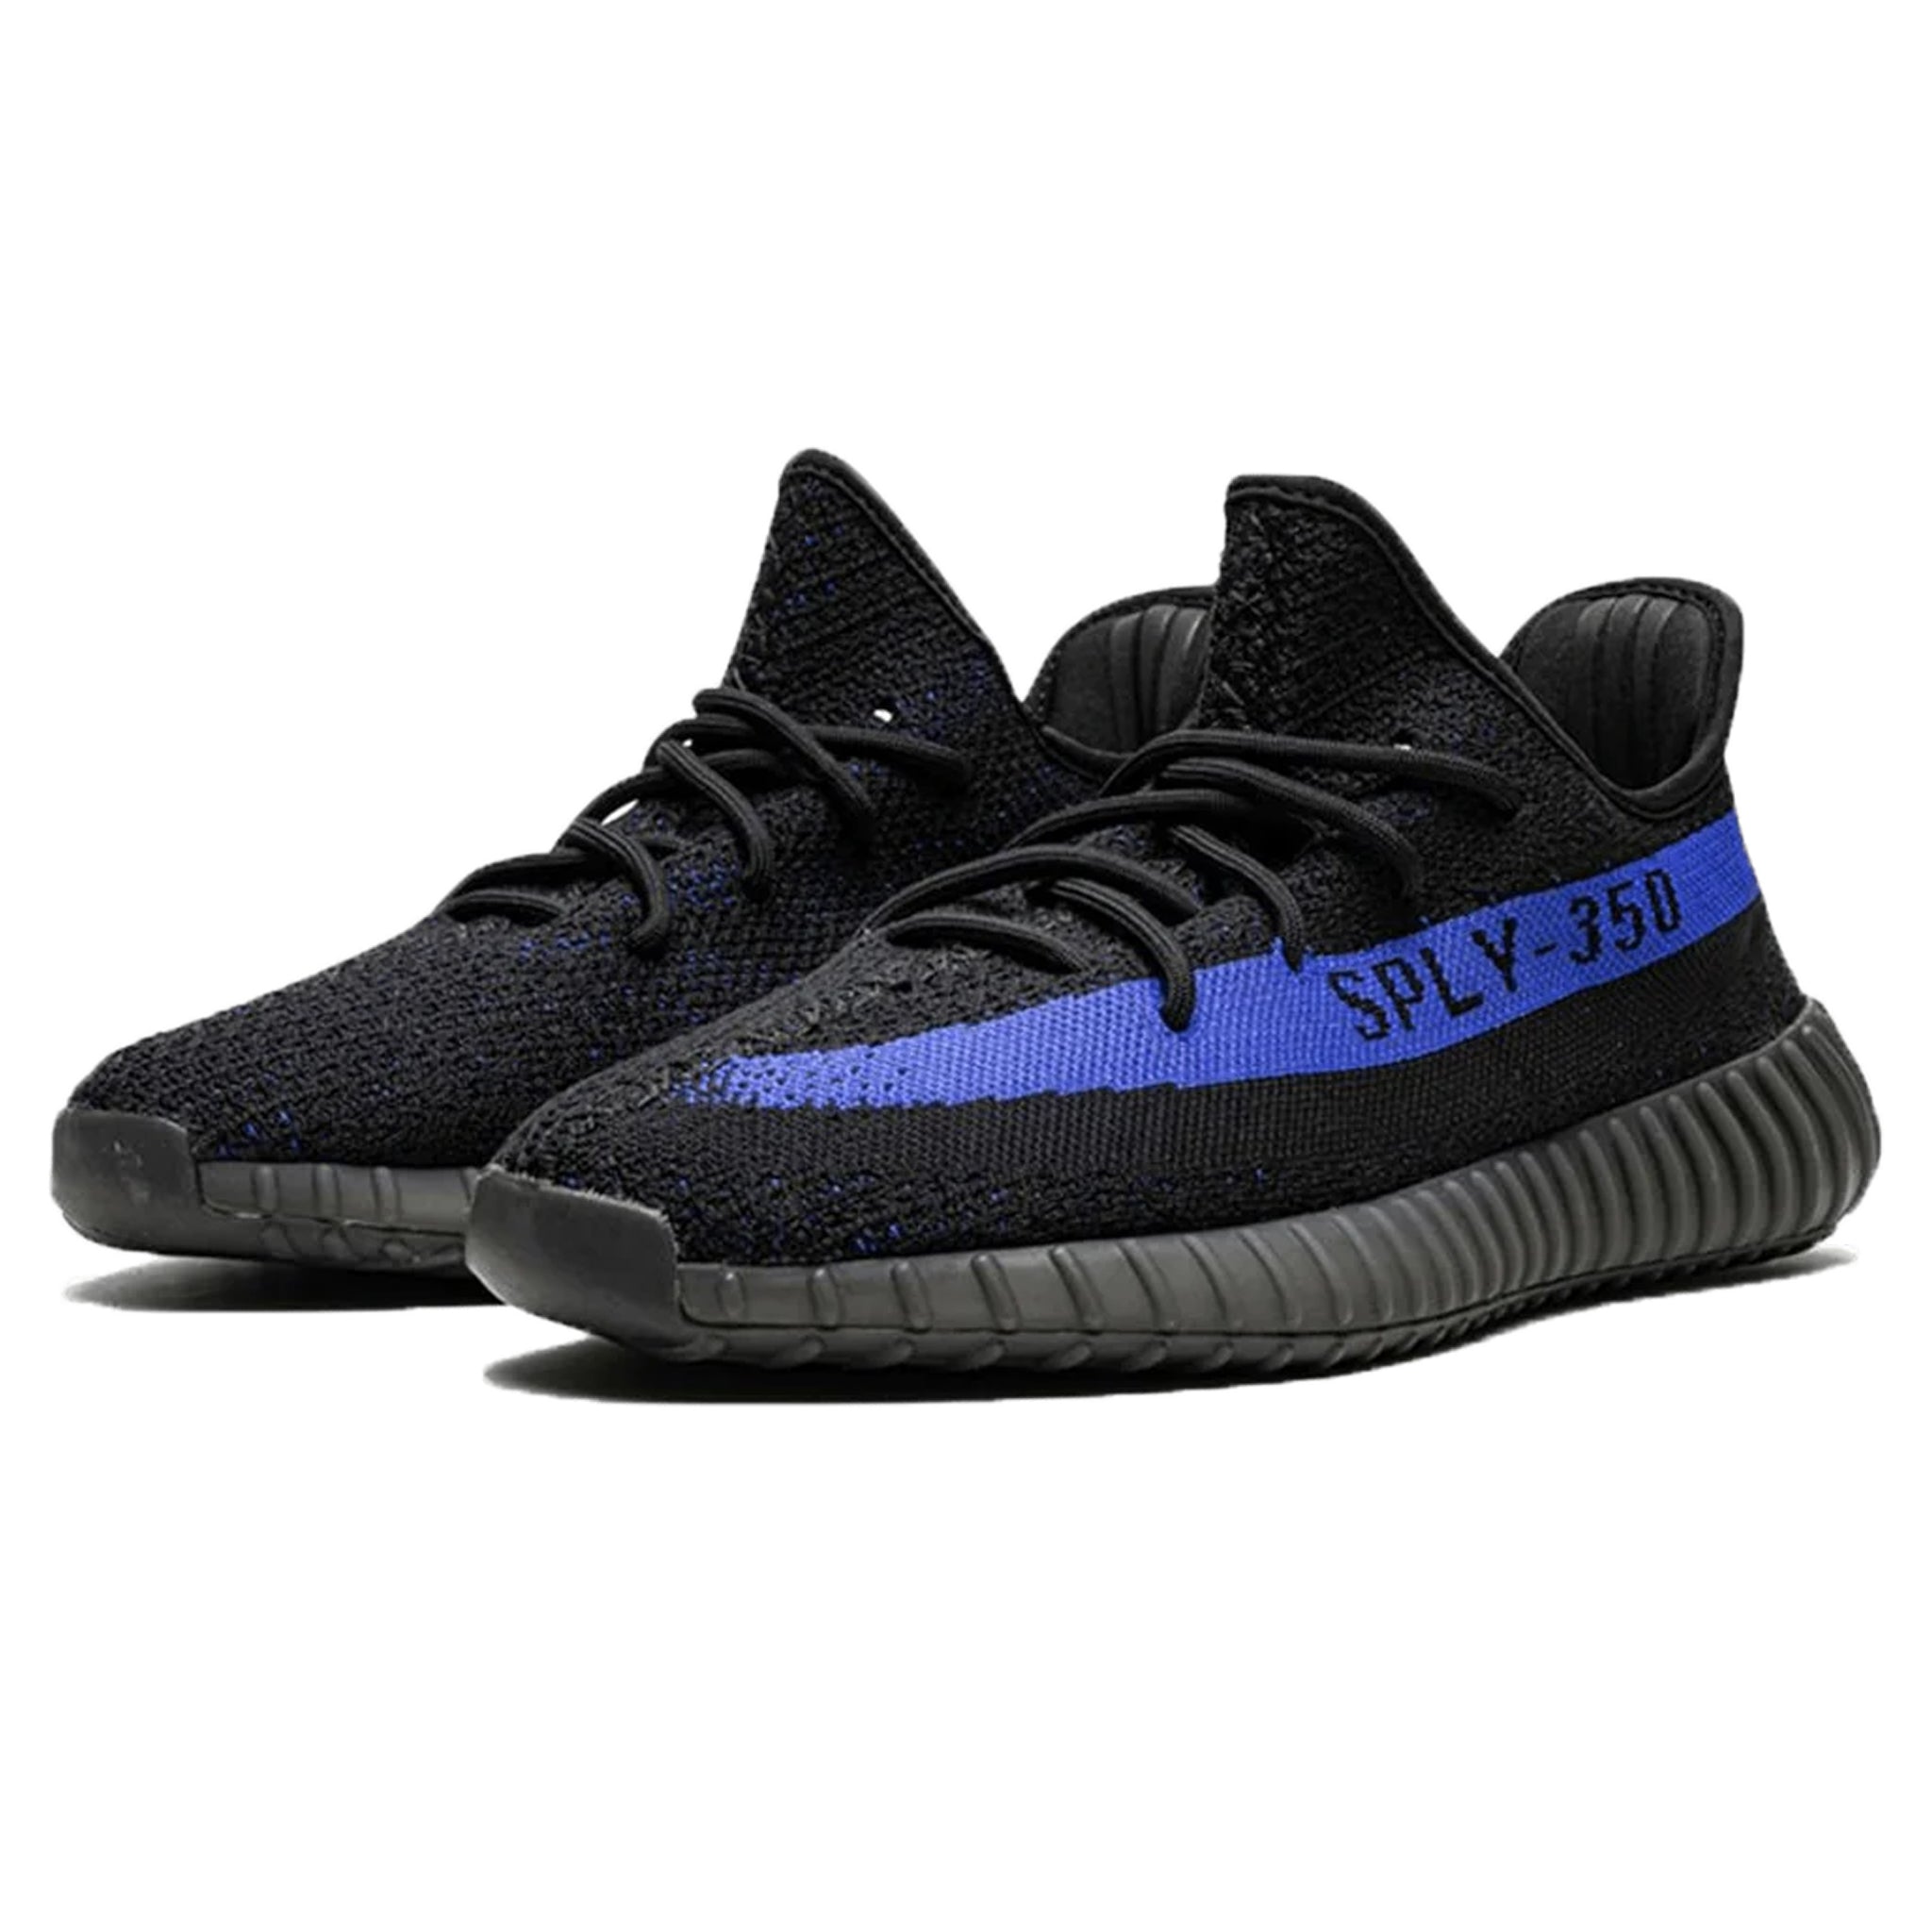 Front side view of Adidas Yeezy Boost 350 V2 Dazzling Blue GY7164